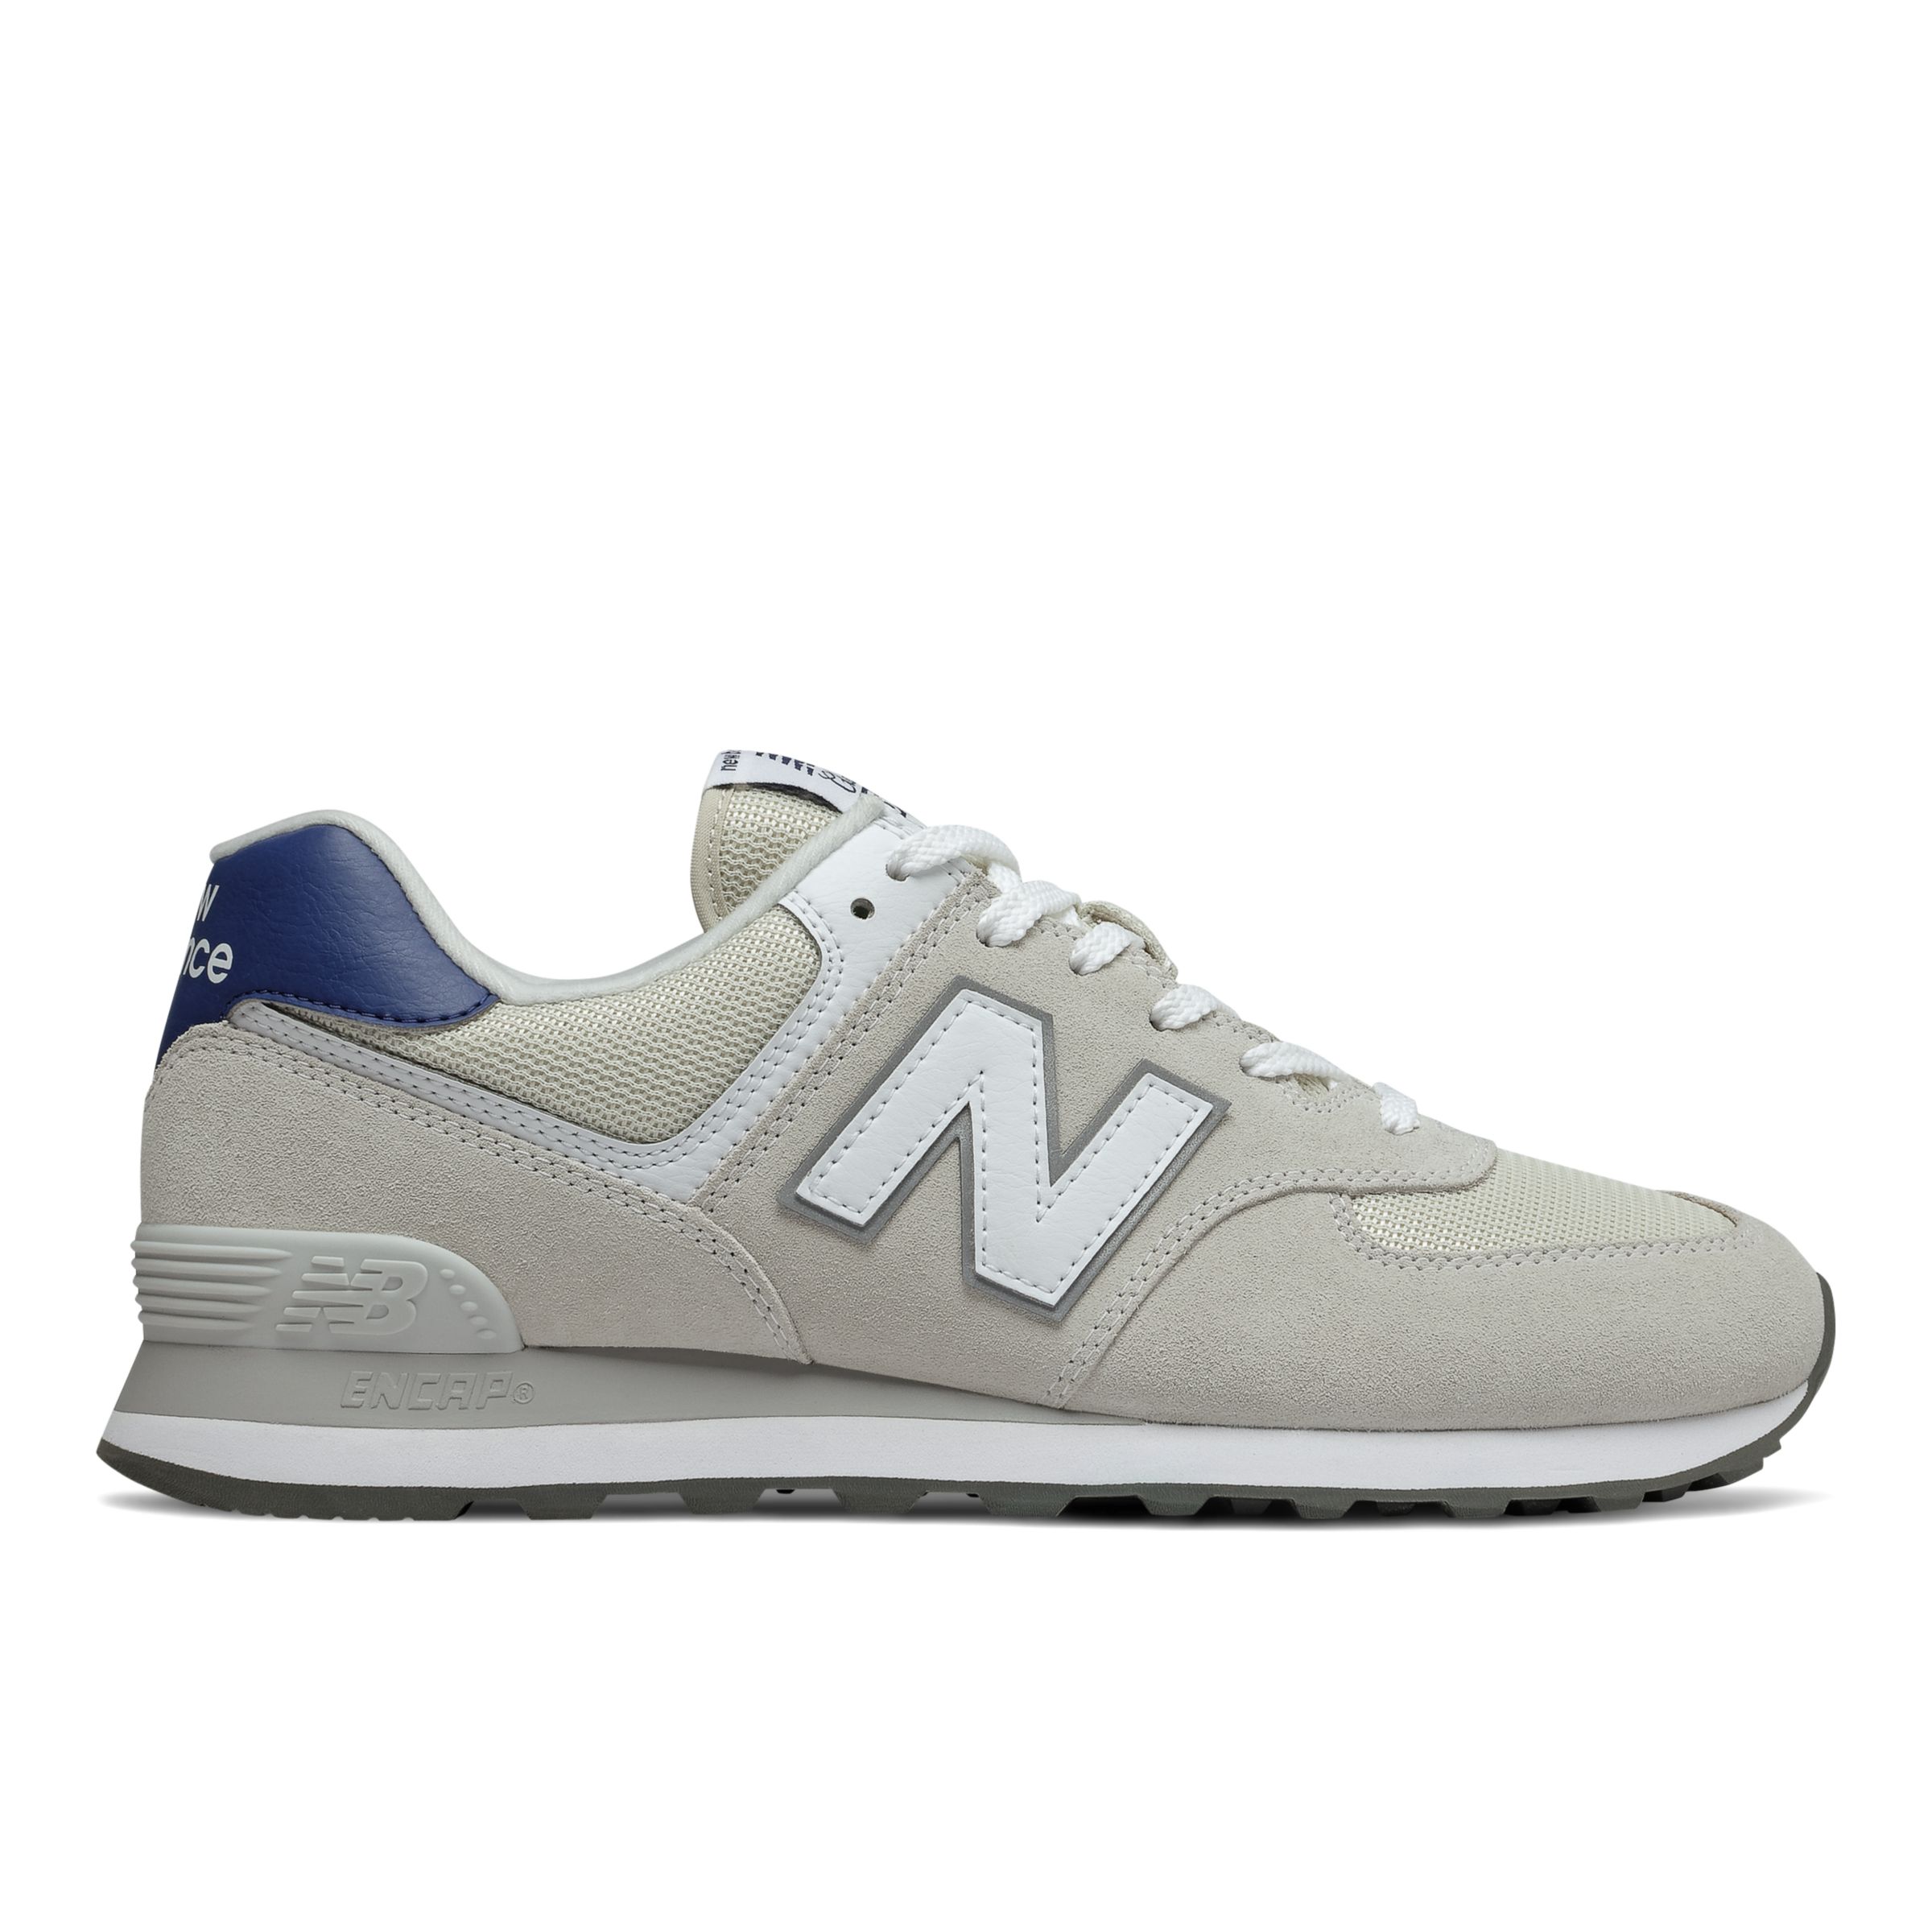 classic new balance sneakers